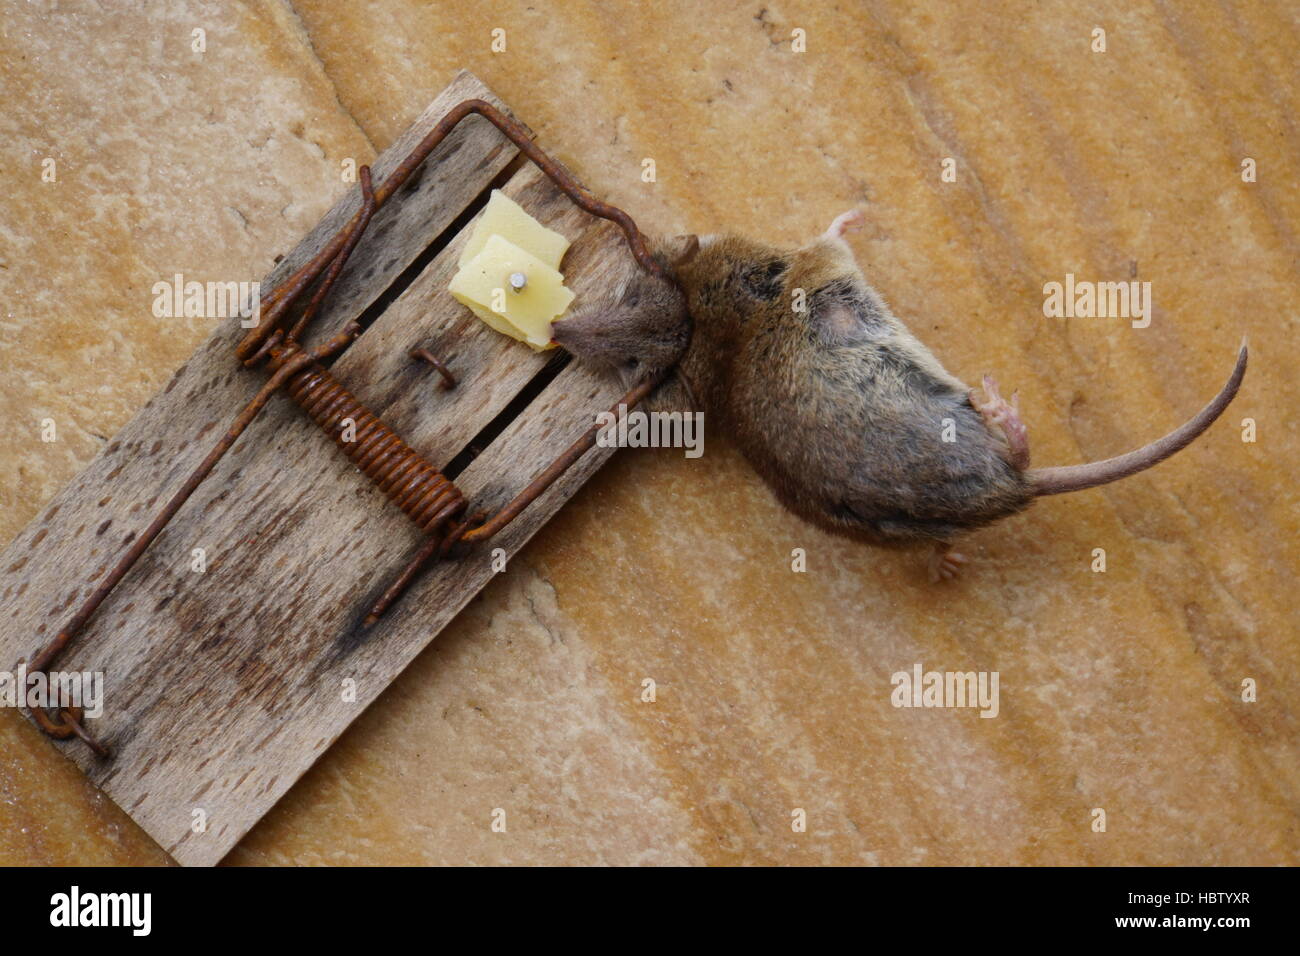 shrew in a mouse trap Stock Photo - Alamy